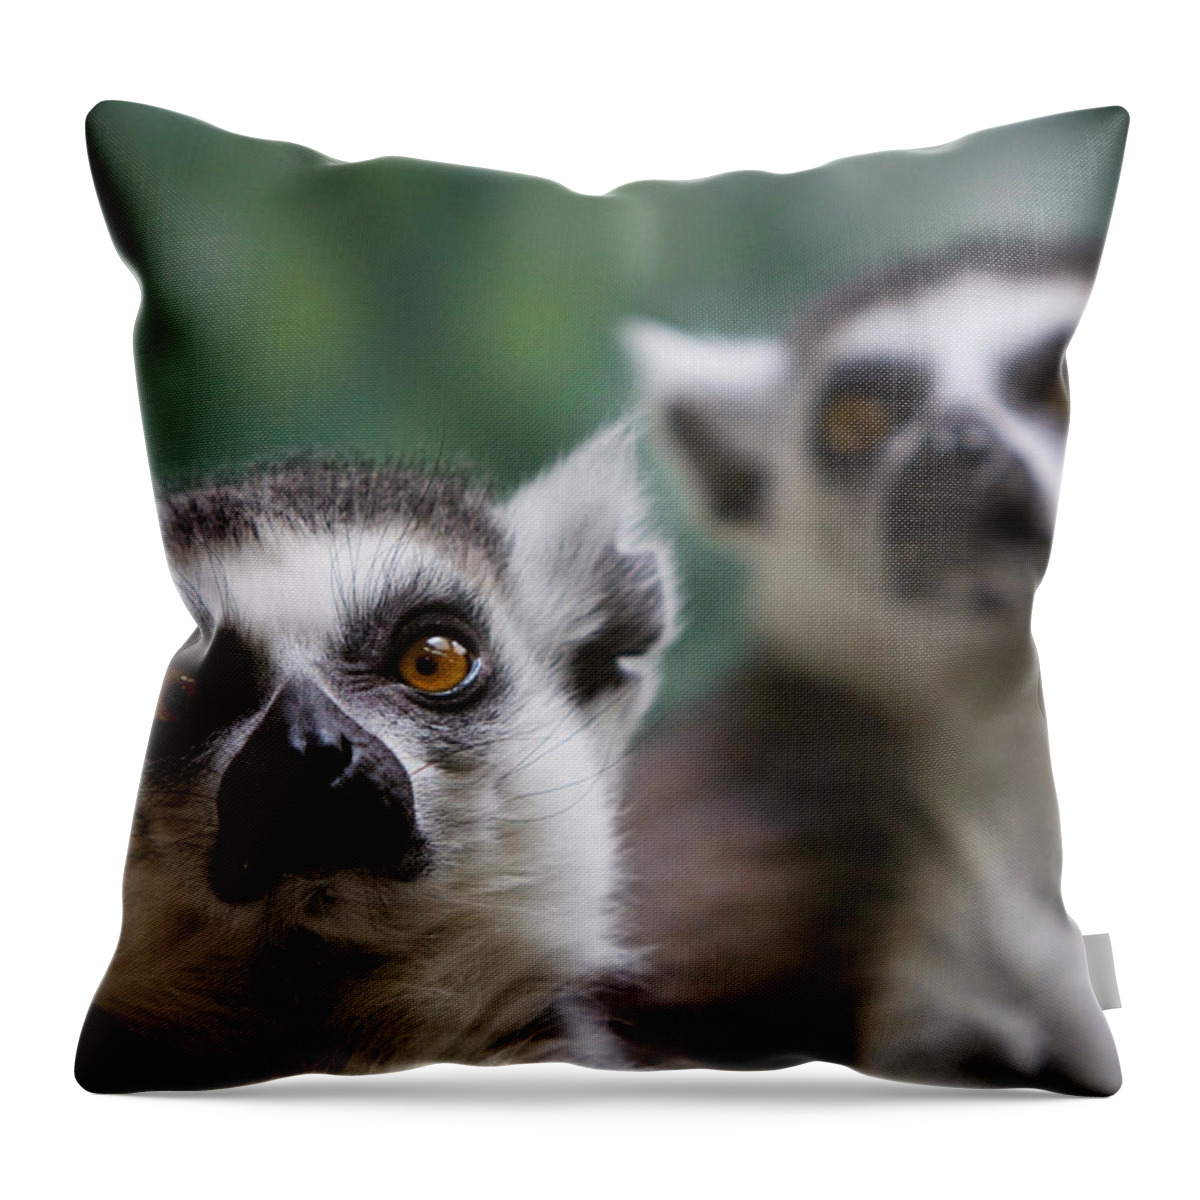 Animal Themes Throw Pillow featuring the photograph Two Ring-tailed Lemurs by Holly Hildreth